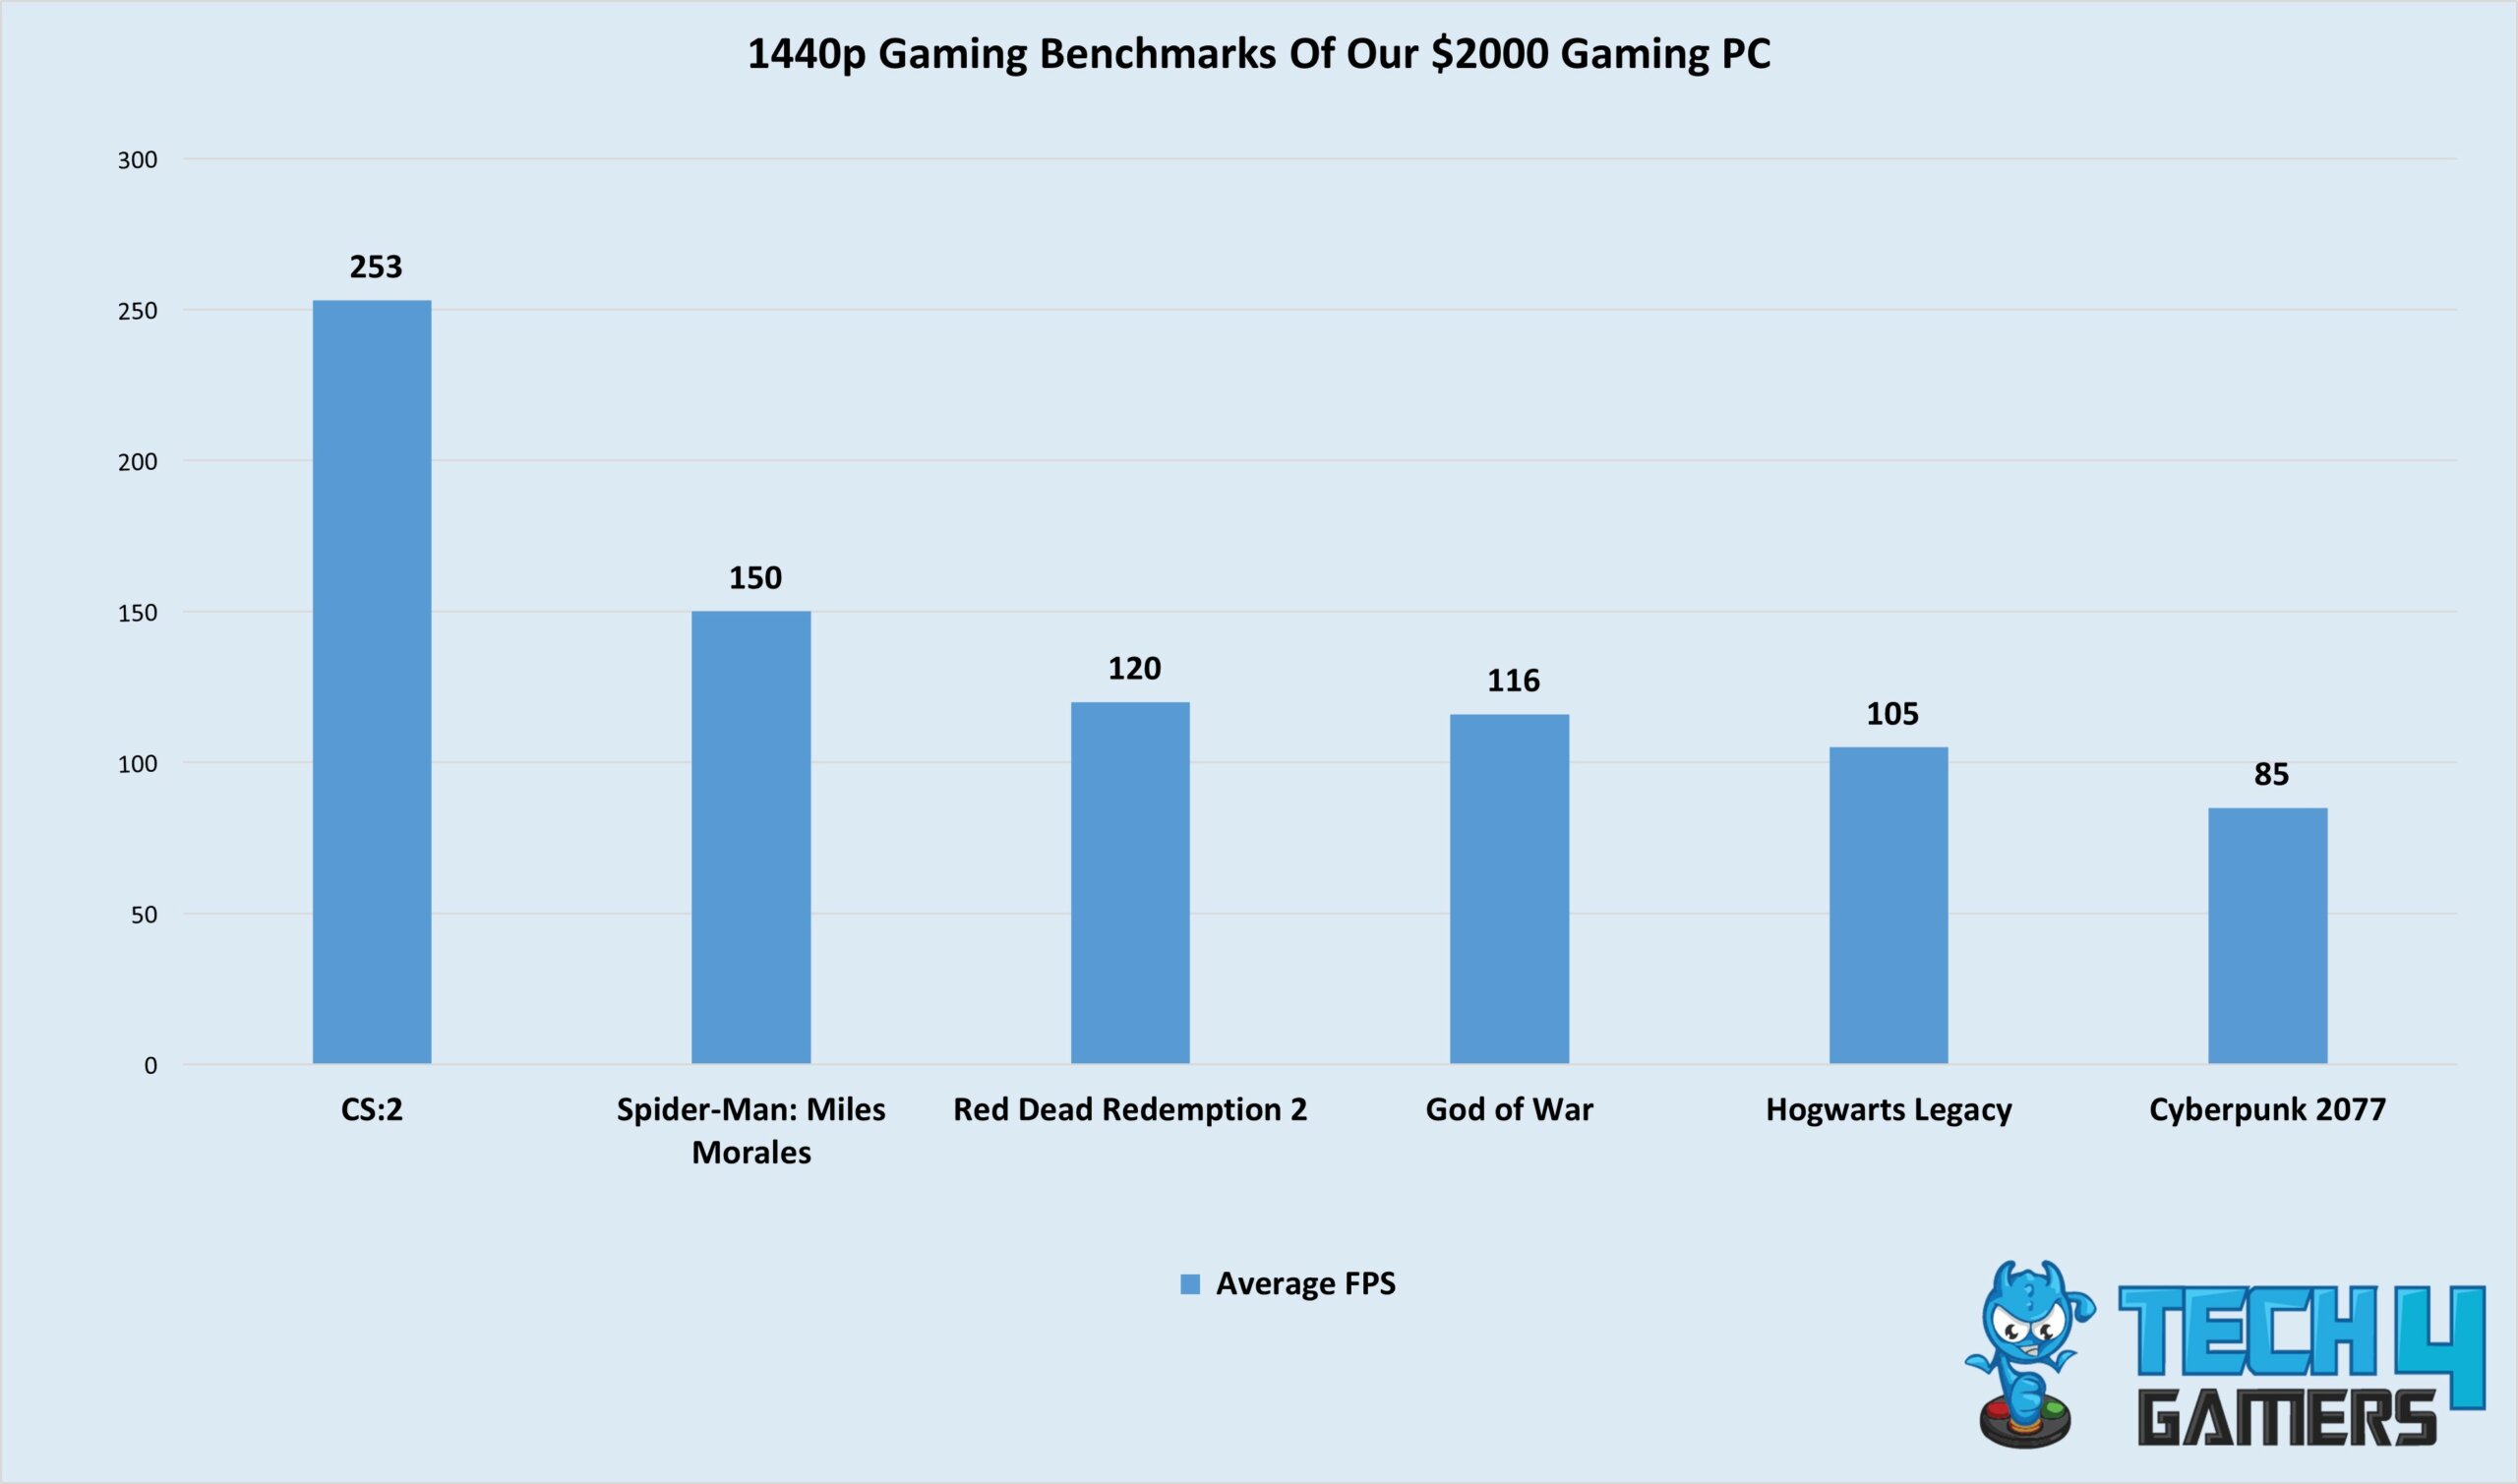 1440p Gaming Benchmarks Of Our $2000 Gaming PC